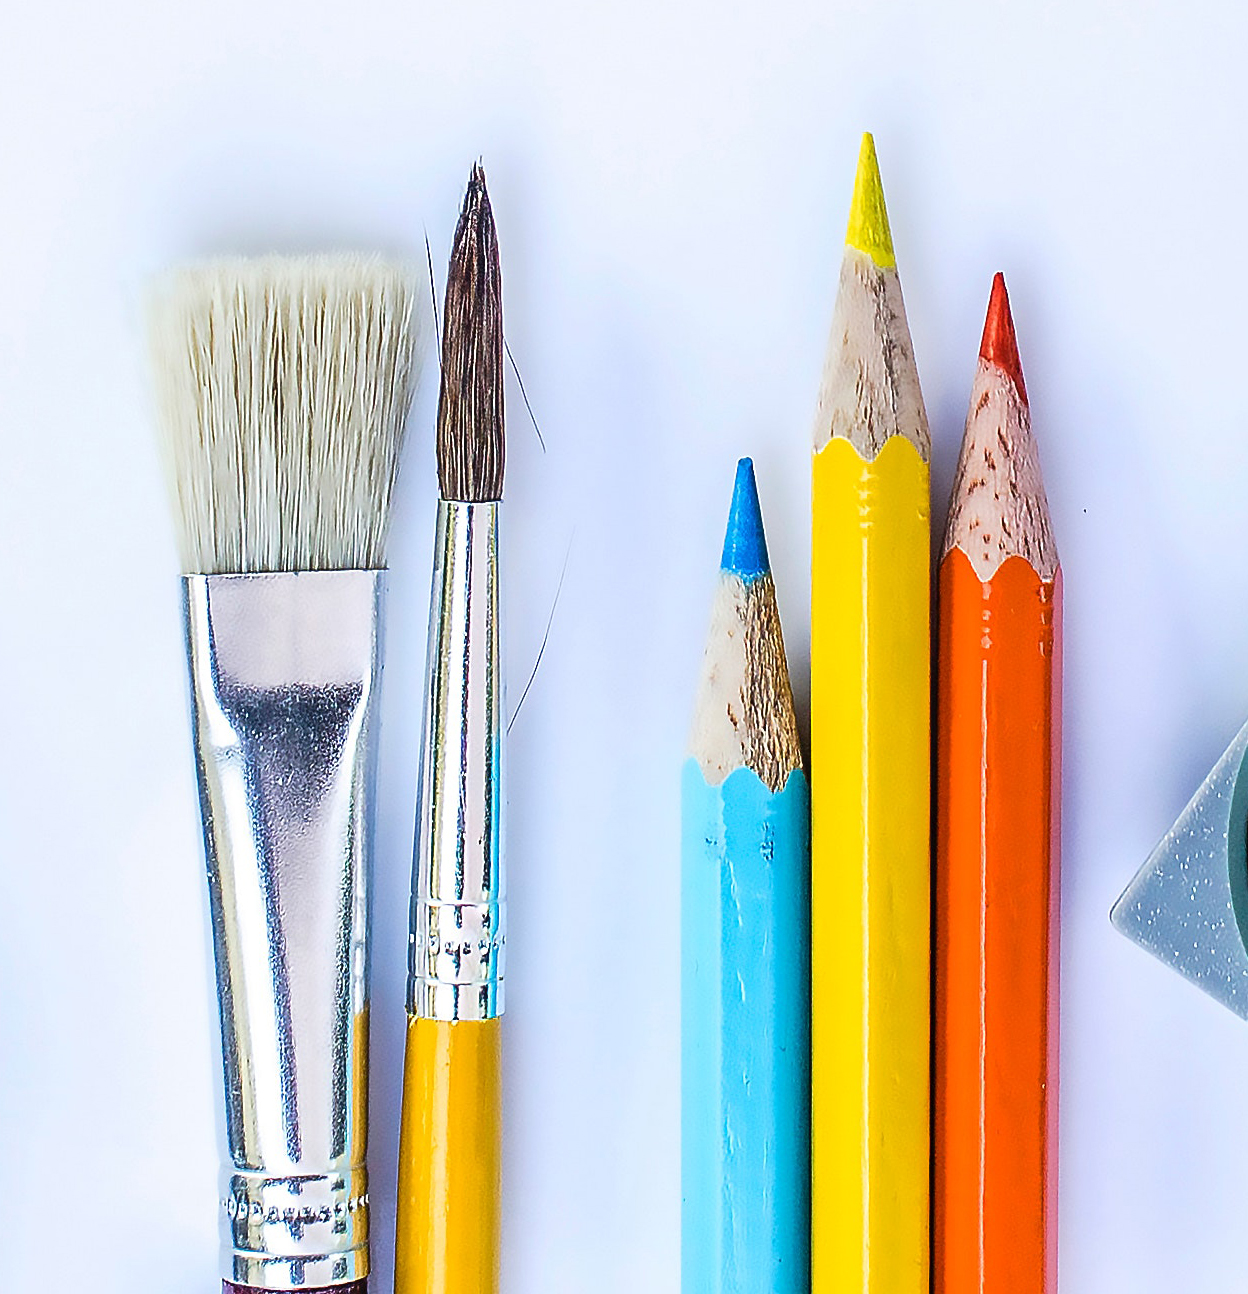 Image of paintbrushes and pencil crayons.